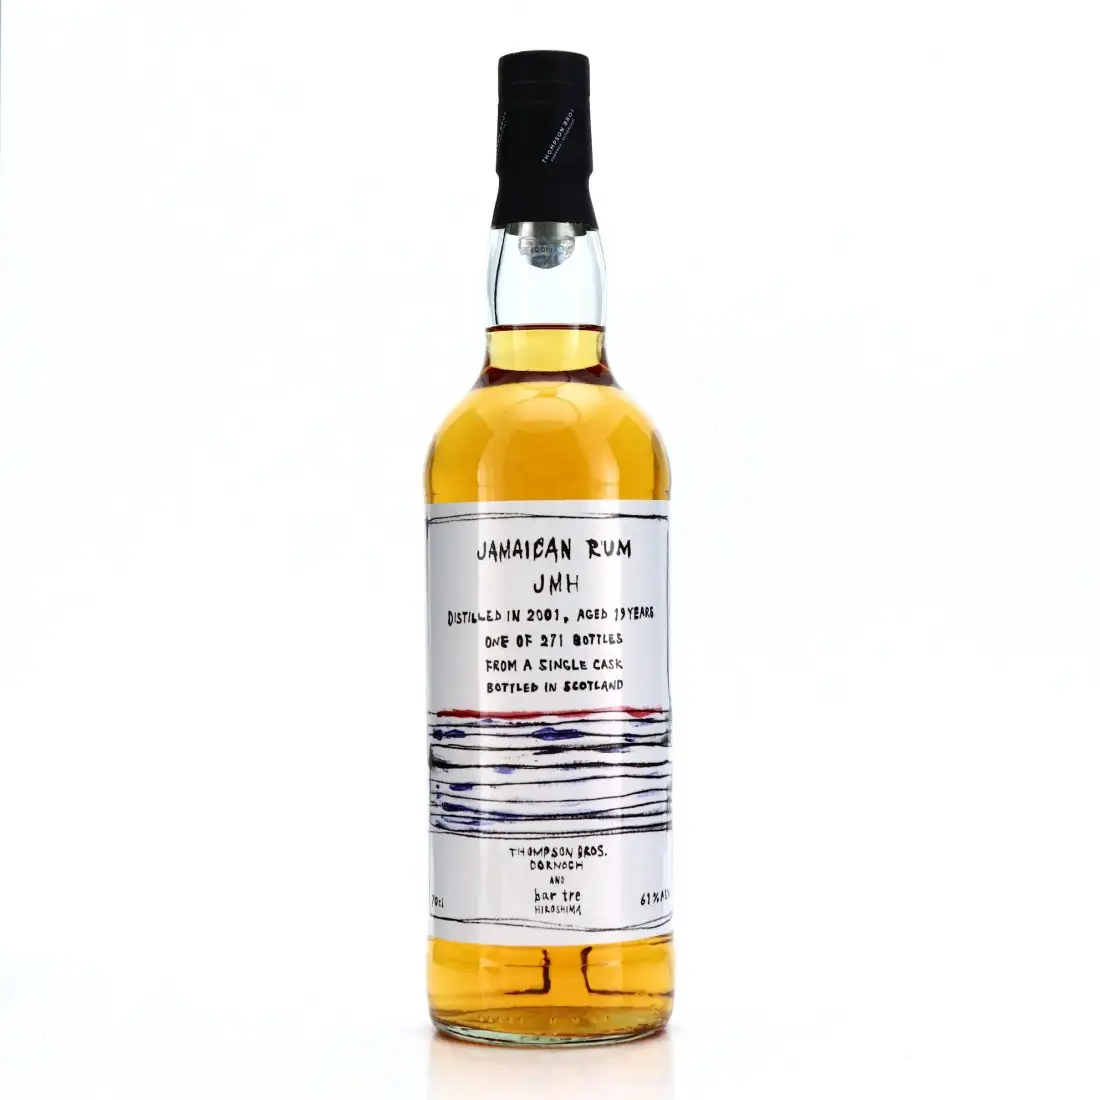 Image of the front of the bottle of the rum Jamaican Rum JMH (Bar Tre) <>H